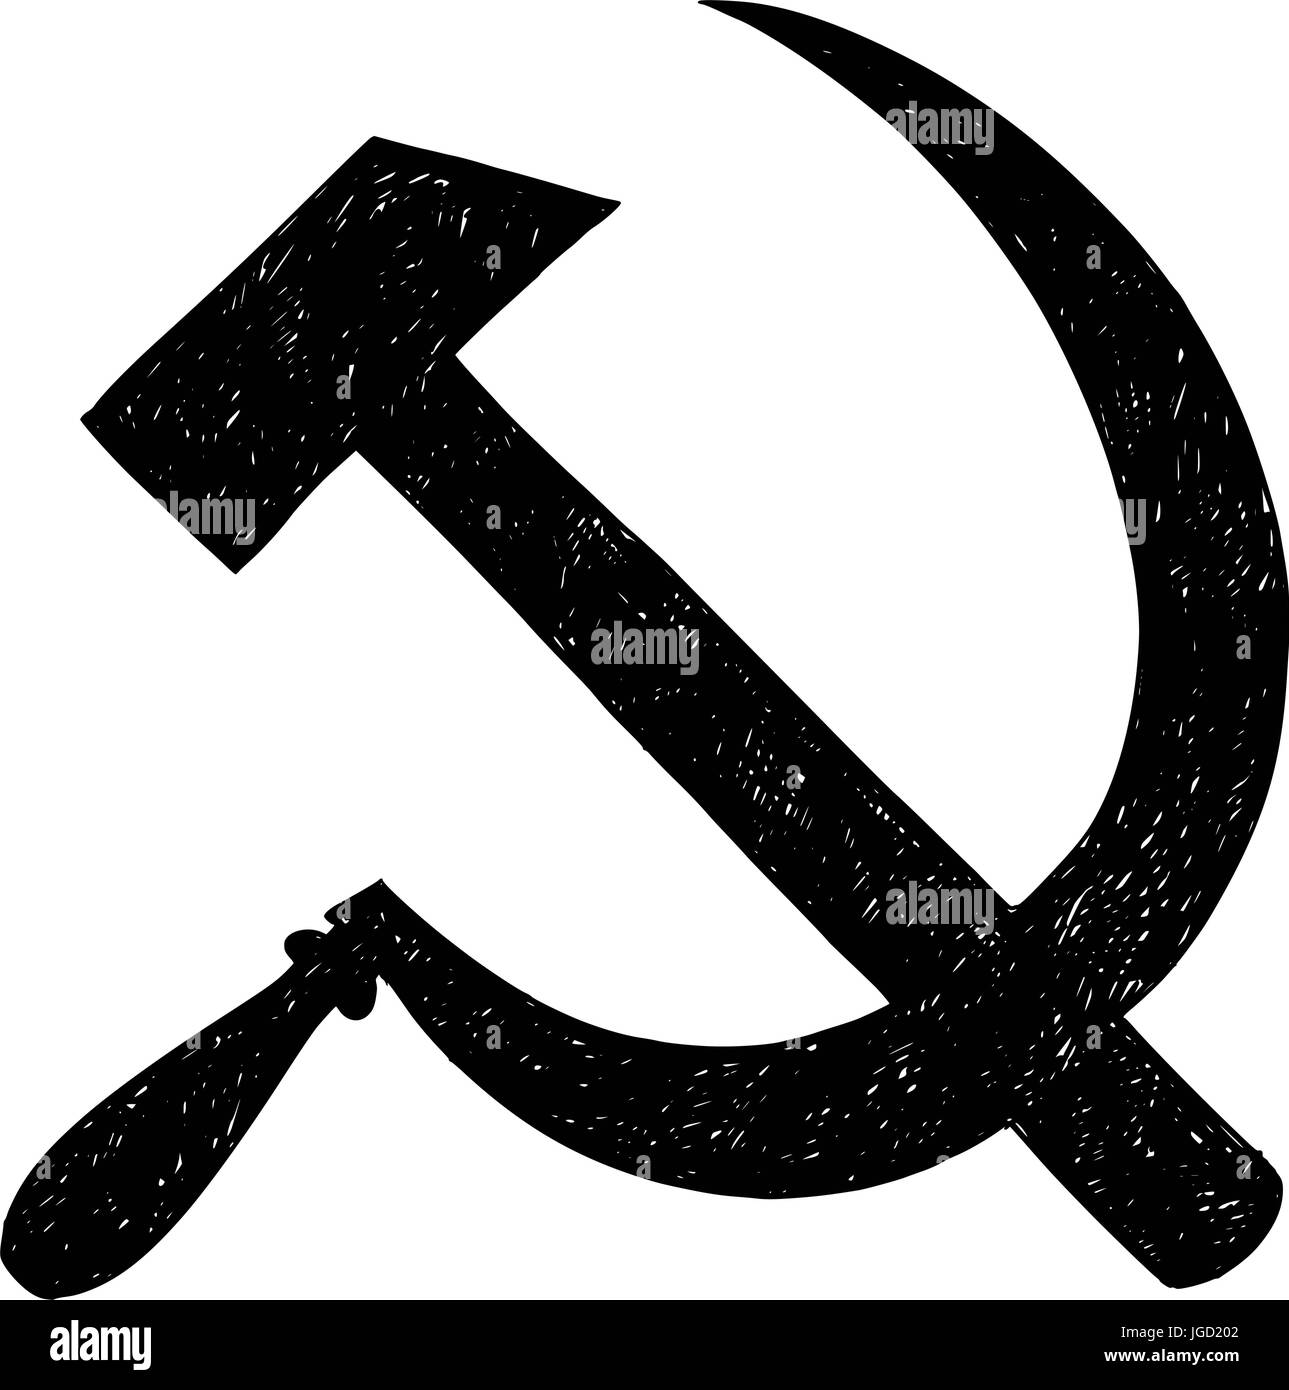 Hammer and sickle - symbol of communism and Soviet Union Stock Vector